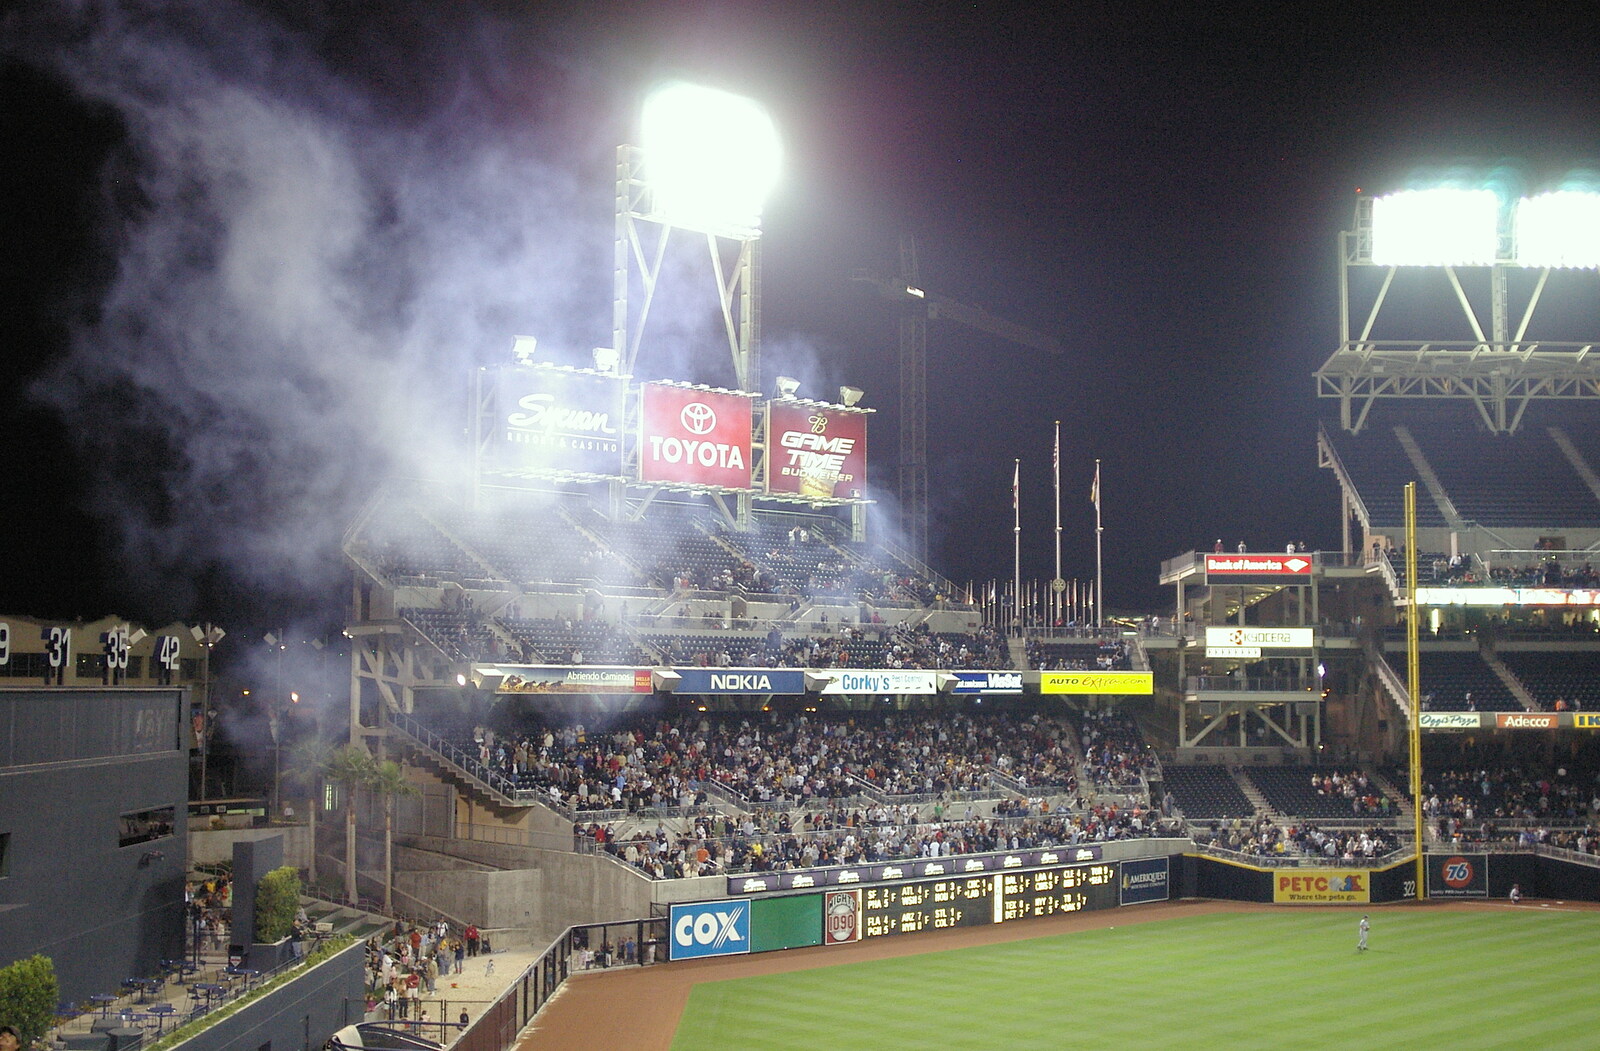 Smoke from celebration fireworks lingers from The Padres at Petco Park: a Baseball Game, San Diego, California - 31st May 2005